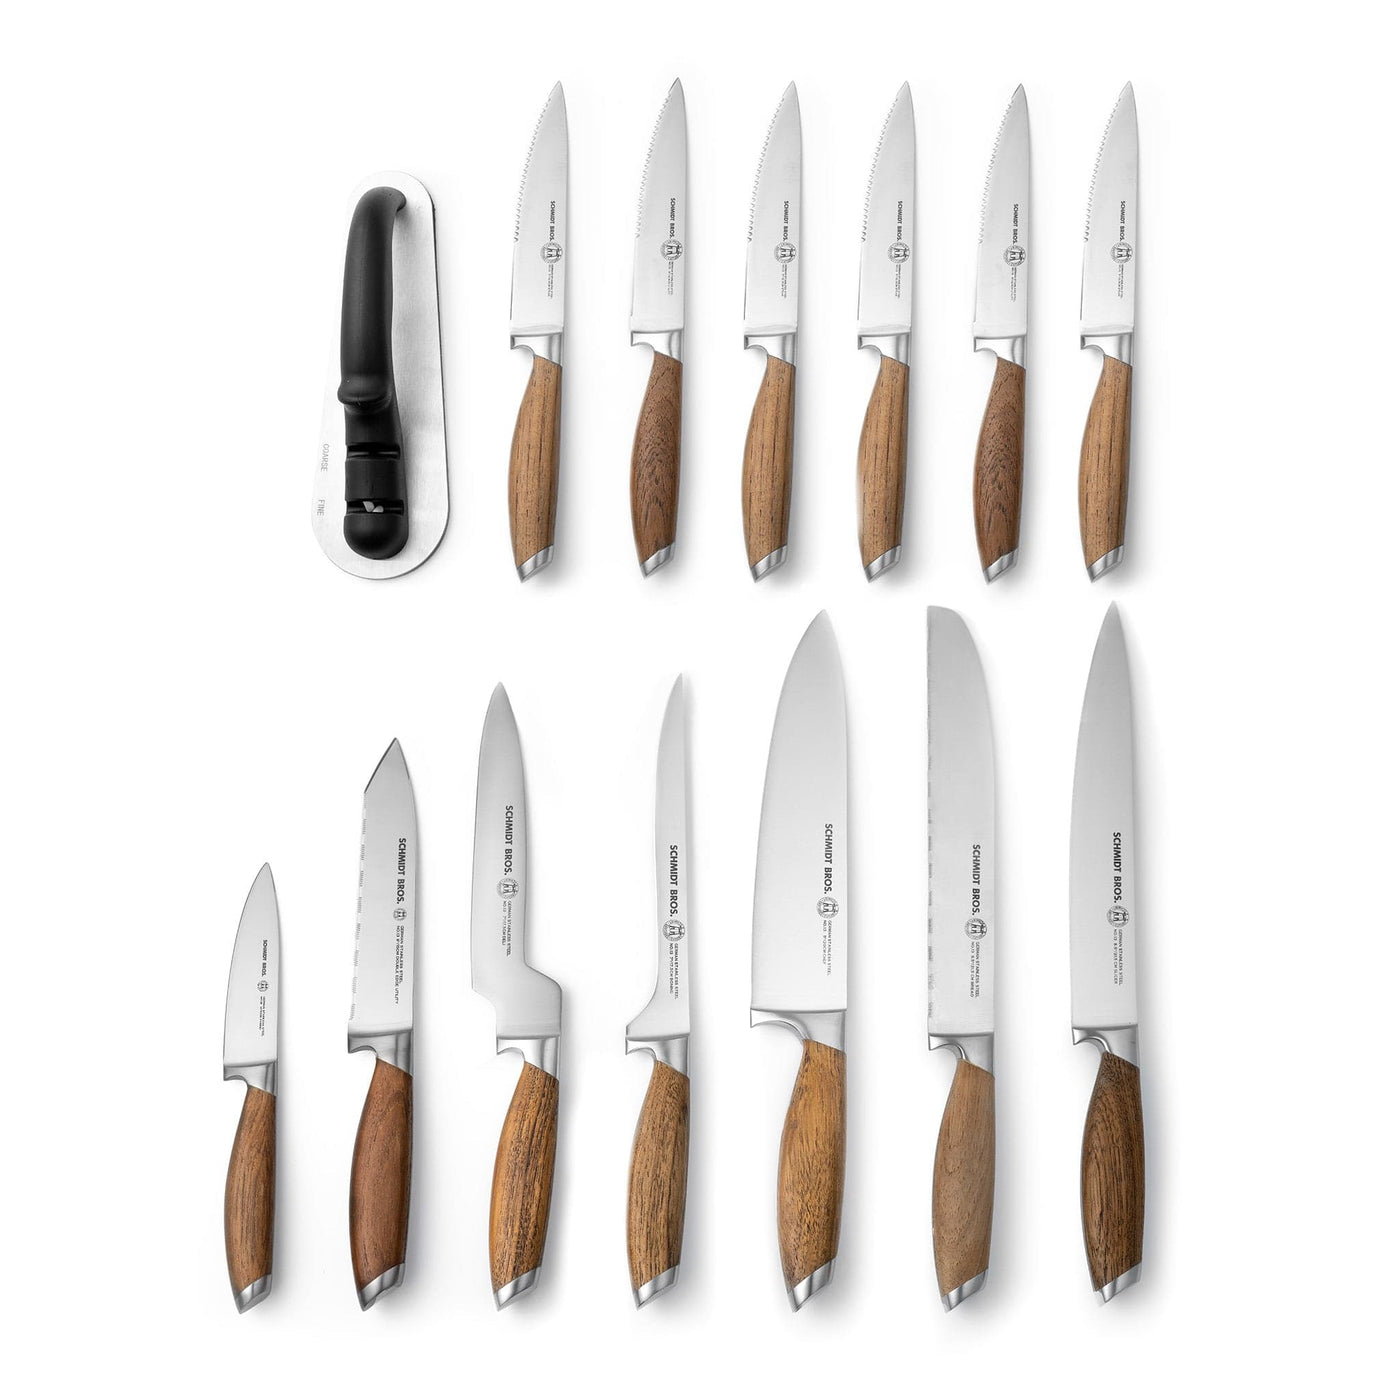  Schmidt Brothers - Bonded Teak, 15-Piece Knife Set, High-Carbon  Stainless Steel Cutlery with Acacia and Acrylic Magnetic Knife Block and  Knife Sharpener: Block Knife Sets: Home & Kitchen